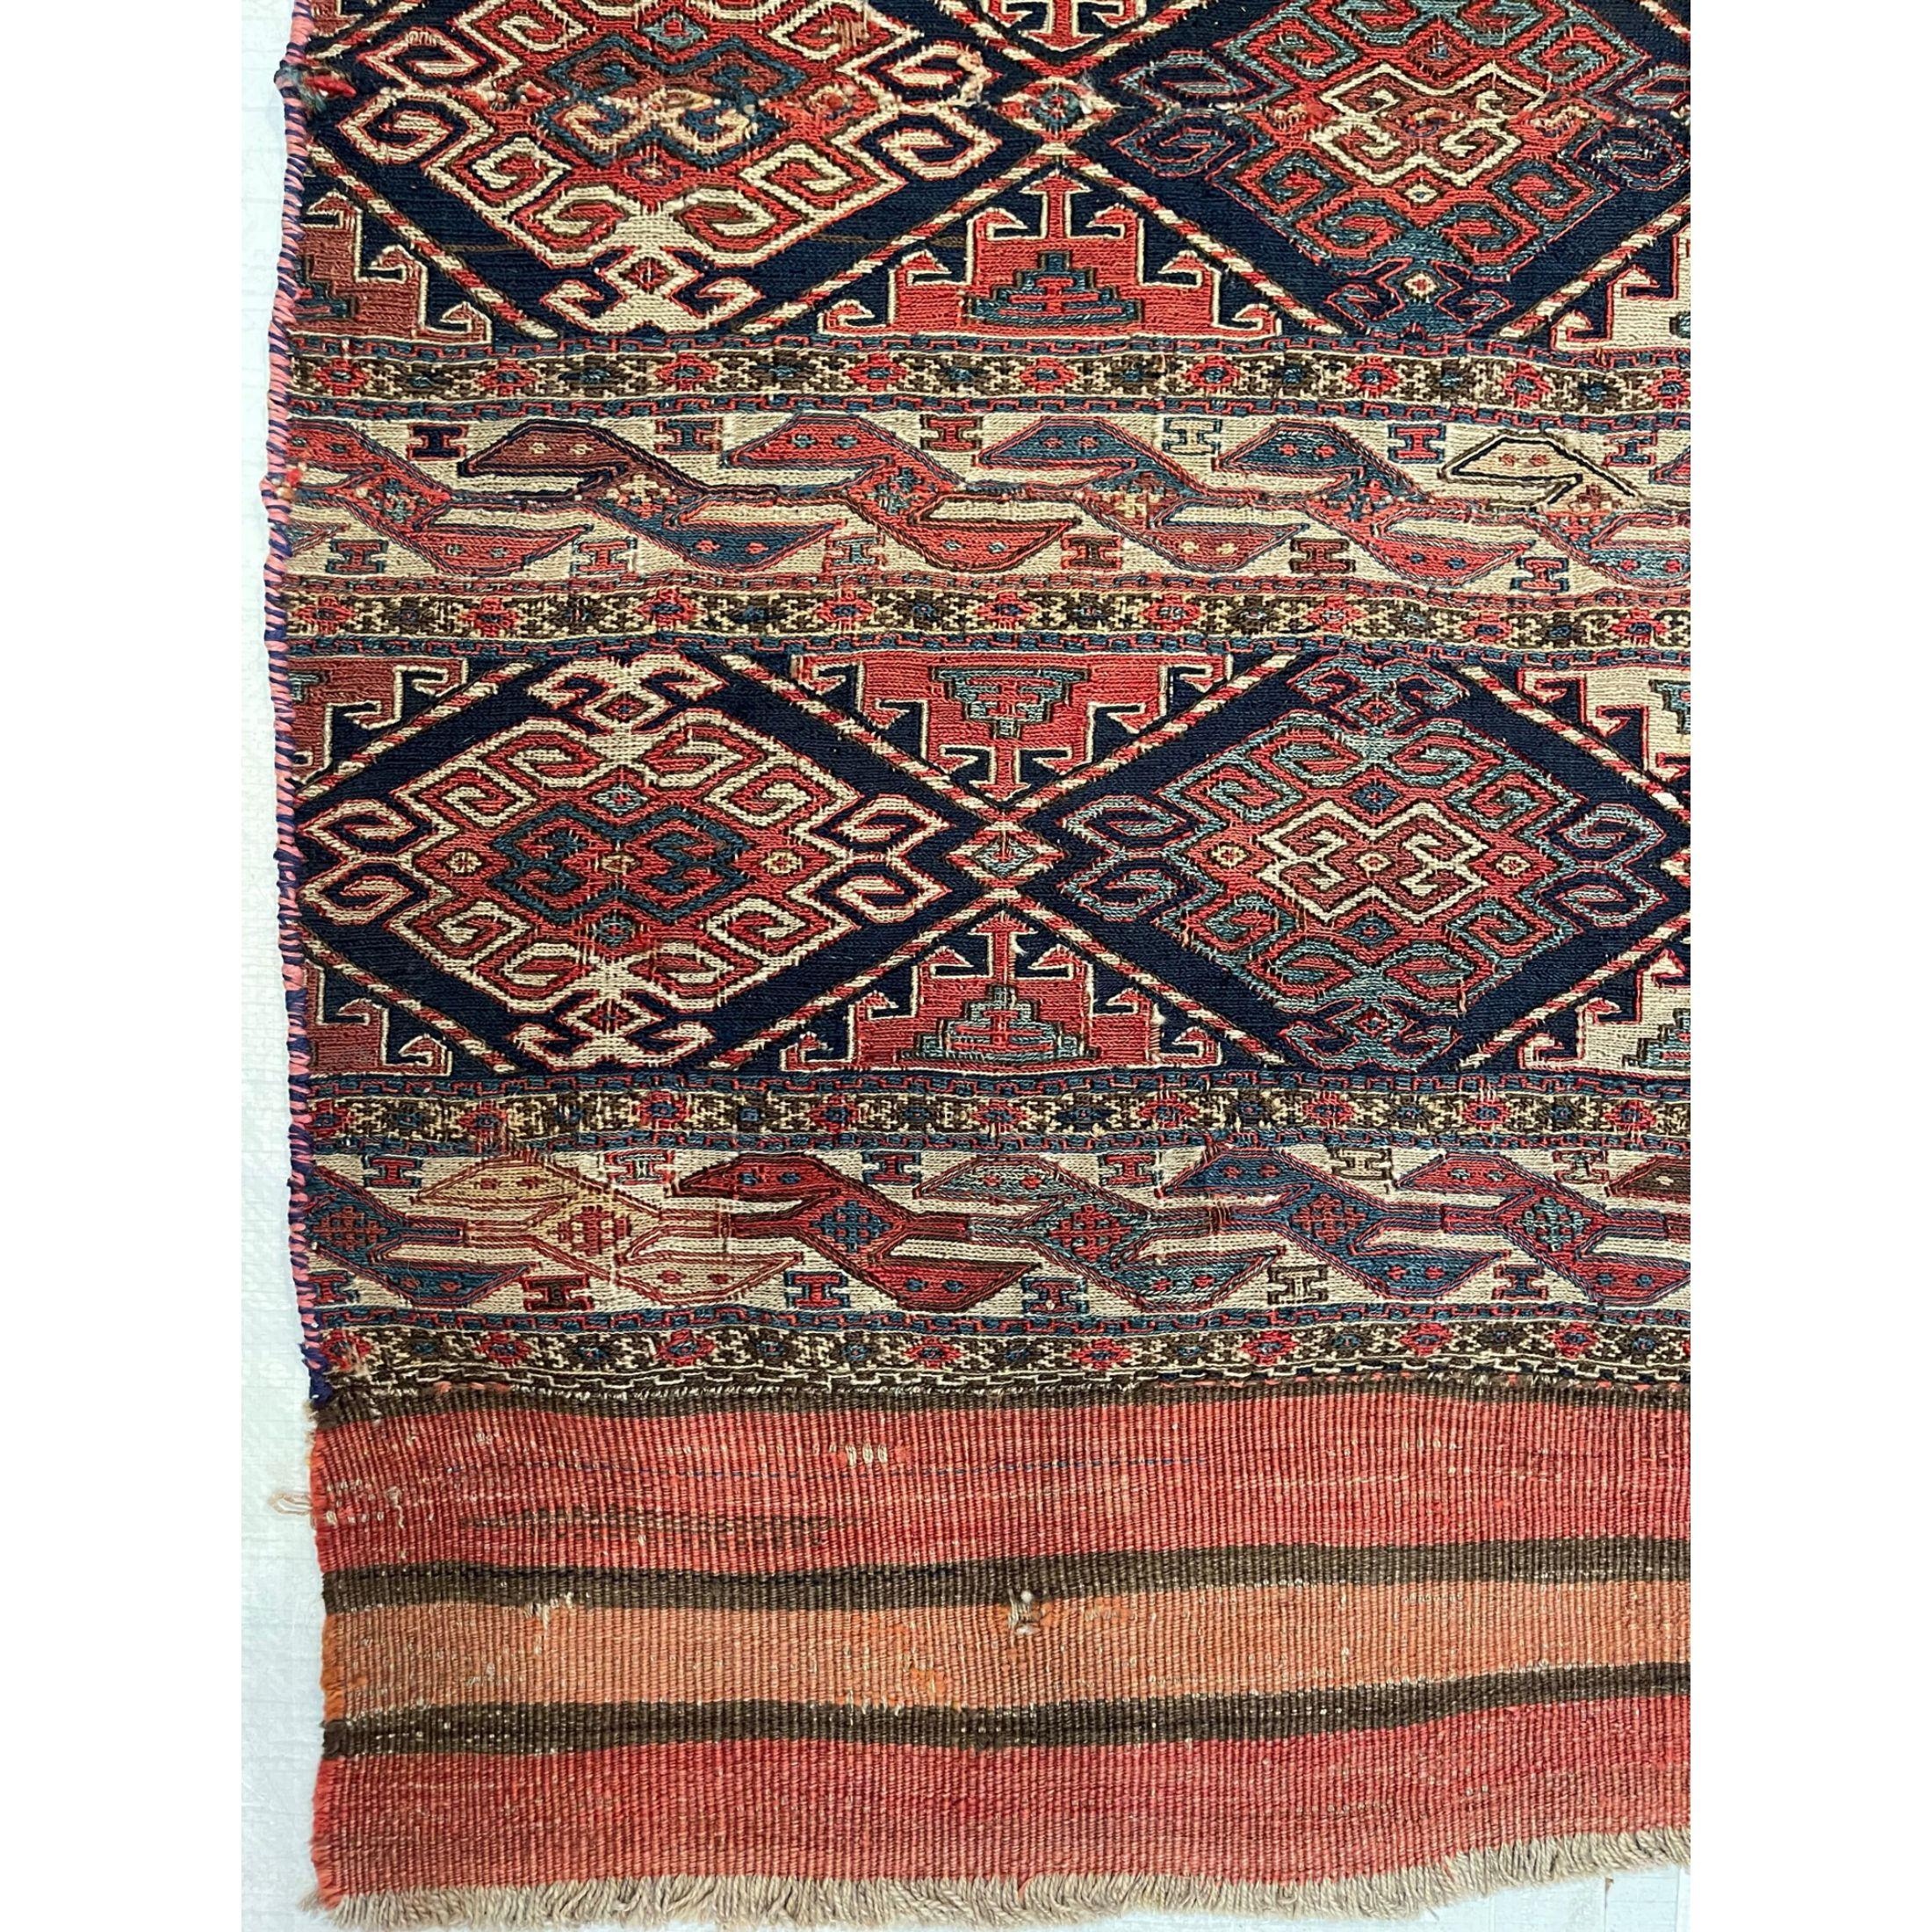 Other Early 20th Century Antique Shahsavand Fish Design Flat Weave Rug For Sale